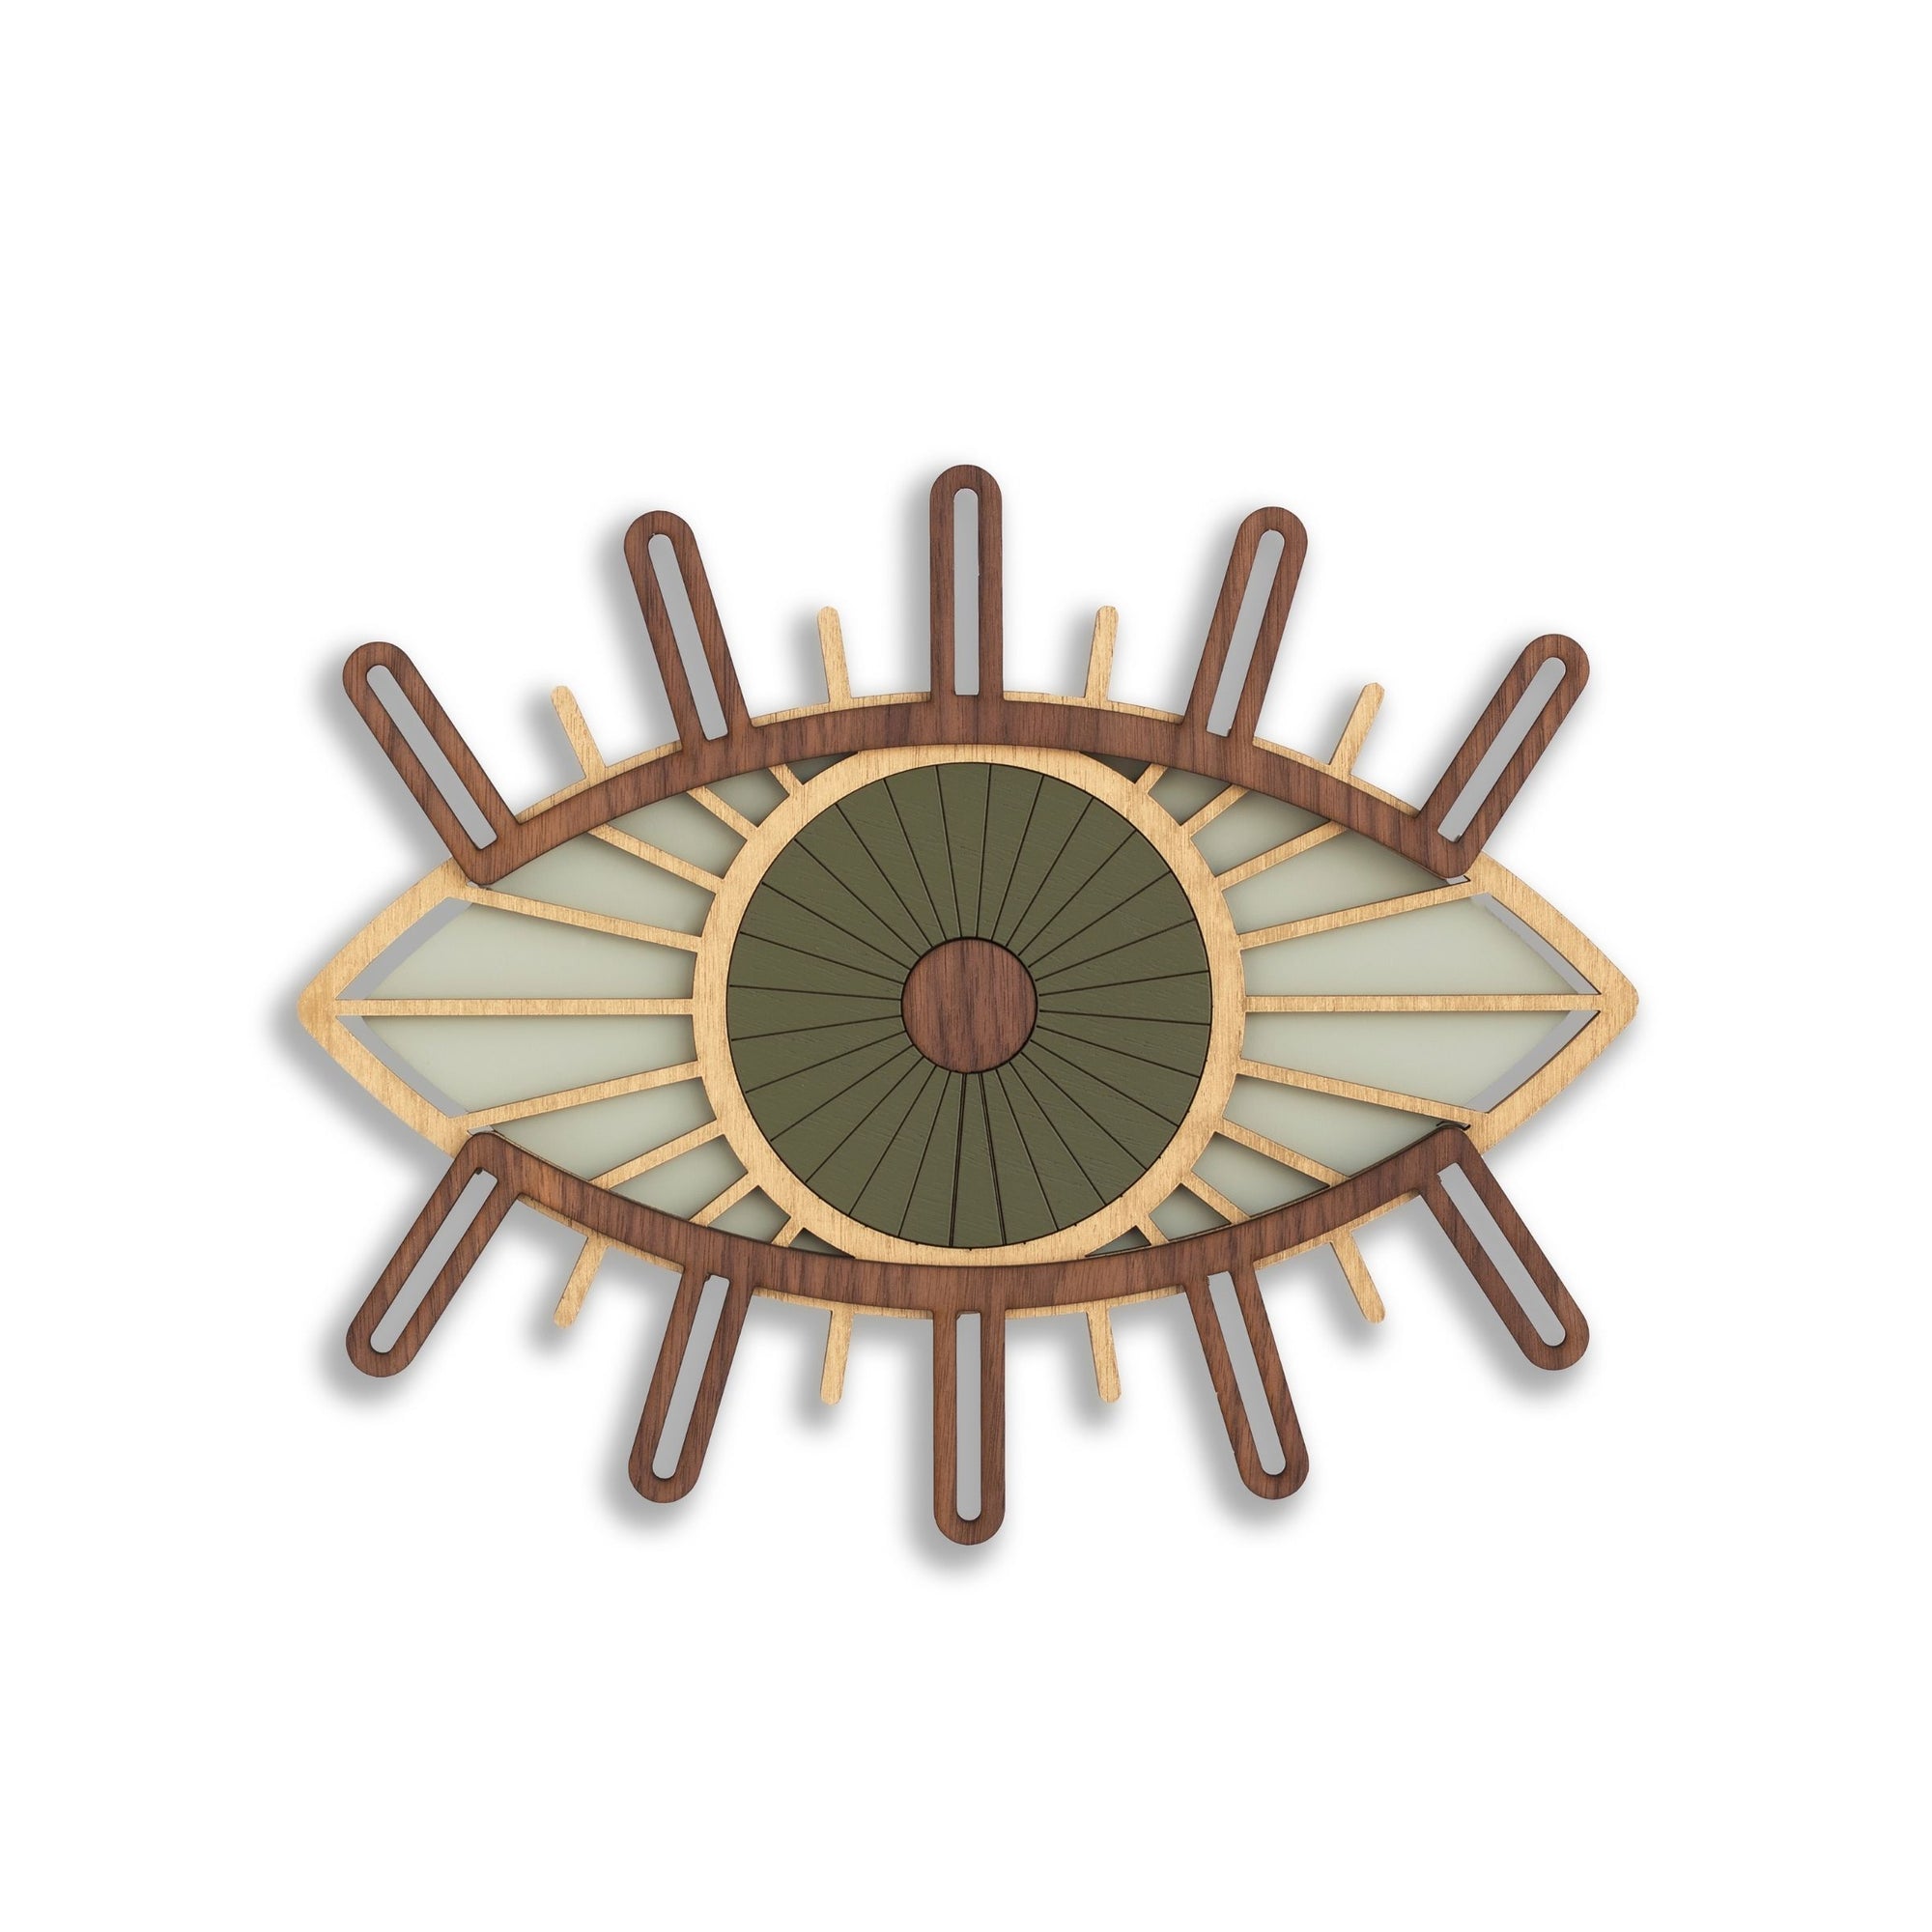 Evil eye wall hanging in a decorative pattern, get your peace!